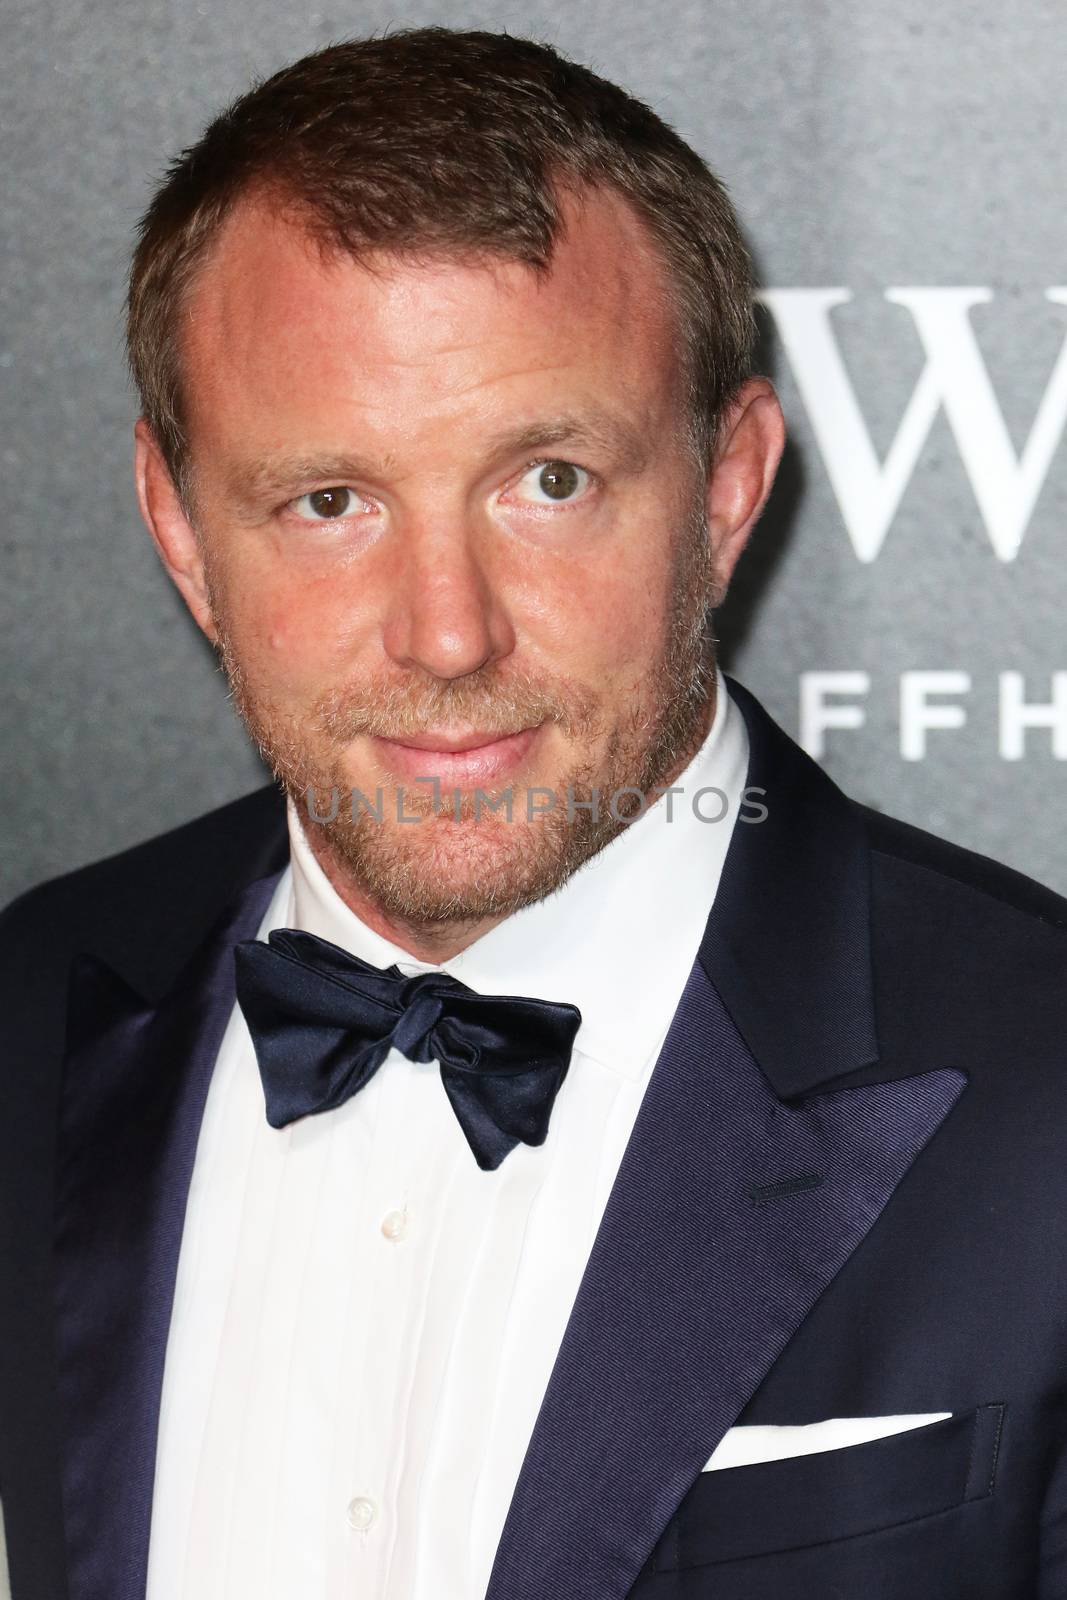 UNITED KINGDOM, London: Guy Ritchie attends the BFI Luminous Fundraising Gala at Guildhall in London on October 6, 2015.